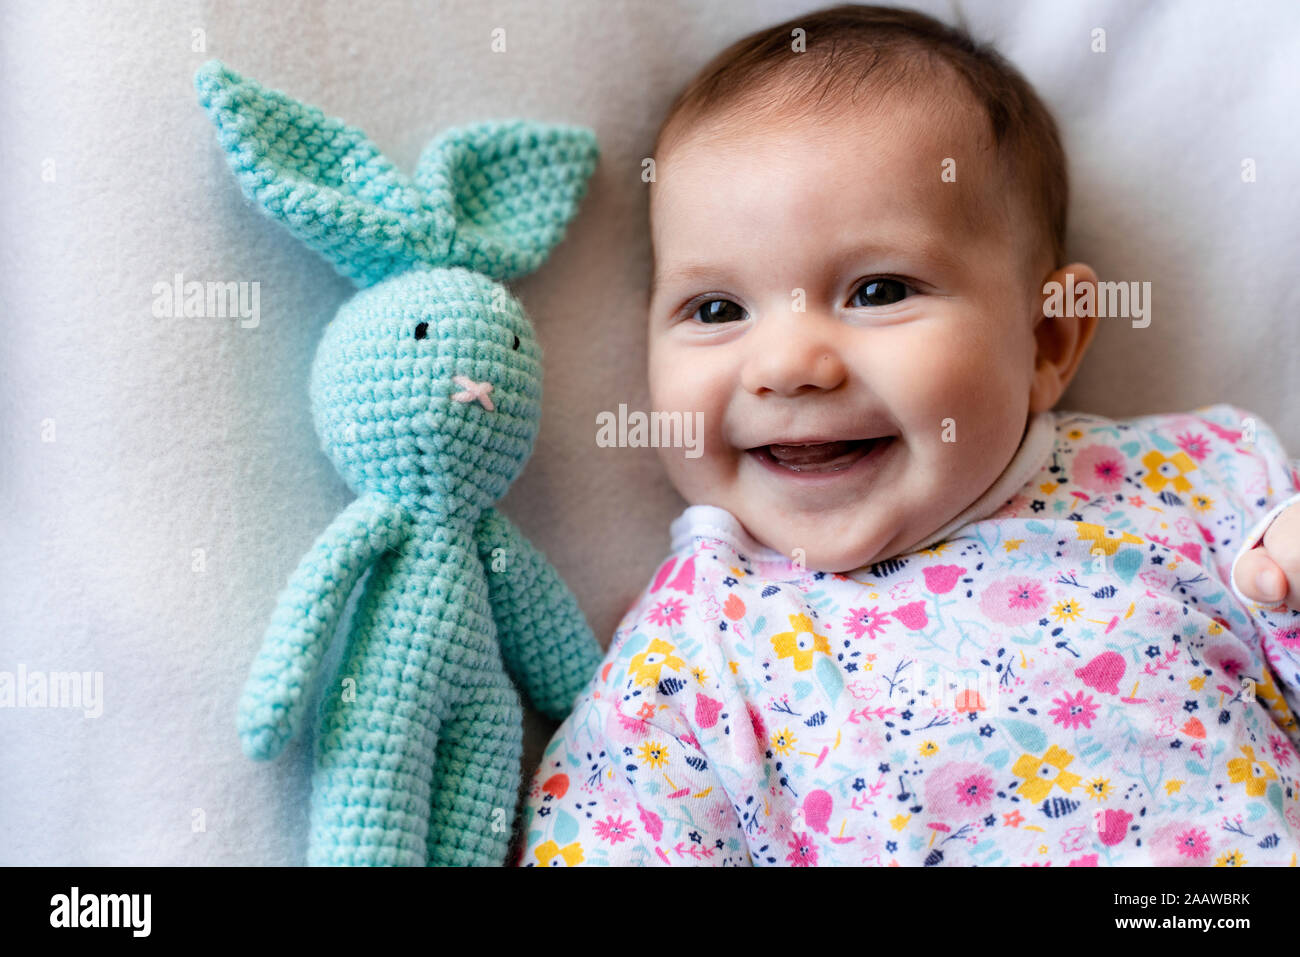 Baby girl with a stuffed bunny toy lying on bed Stock Photo